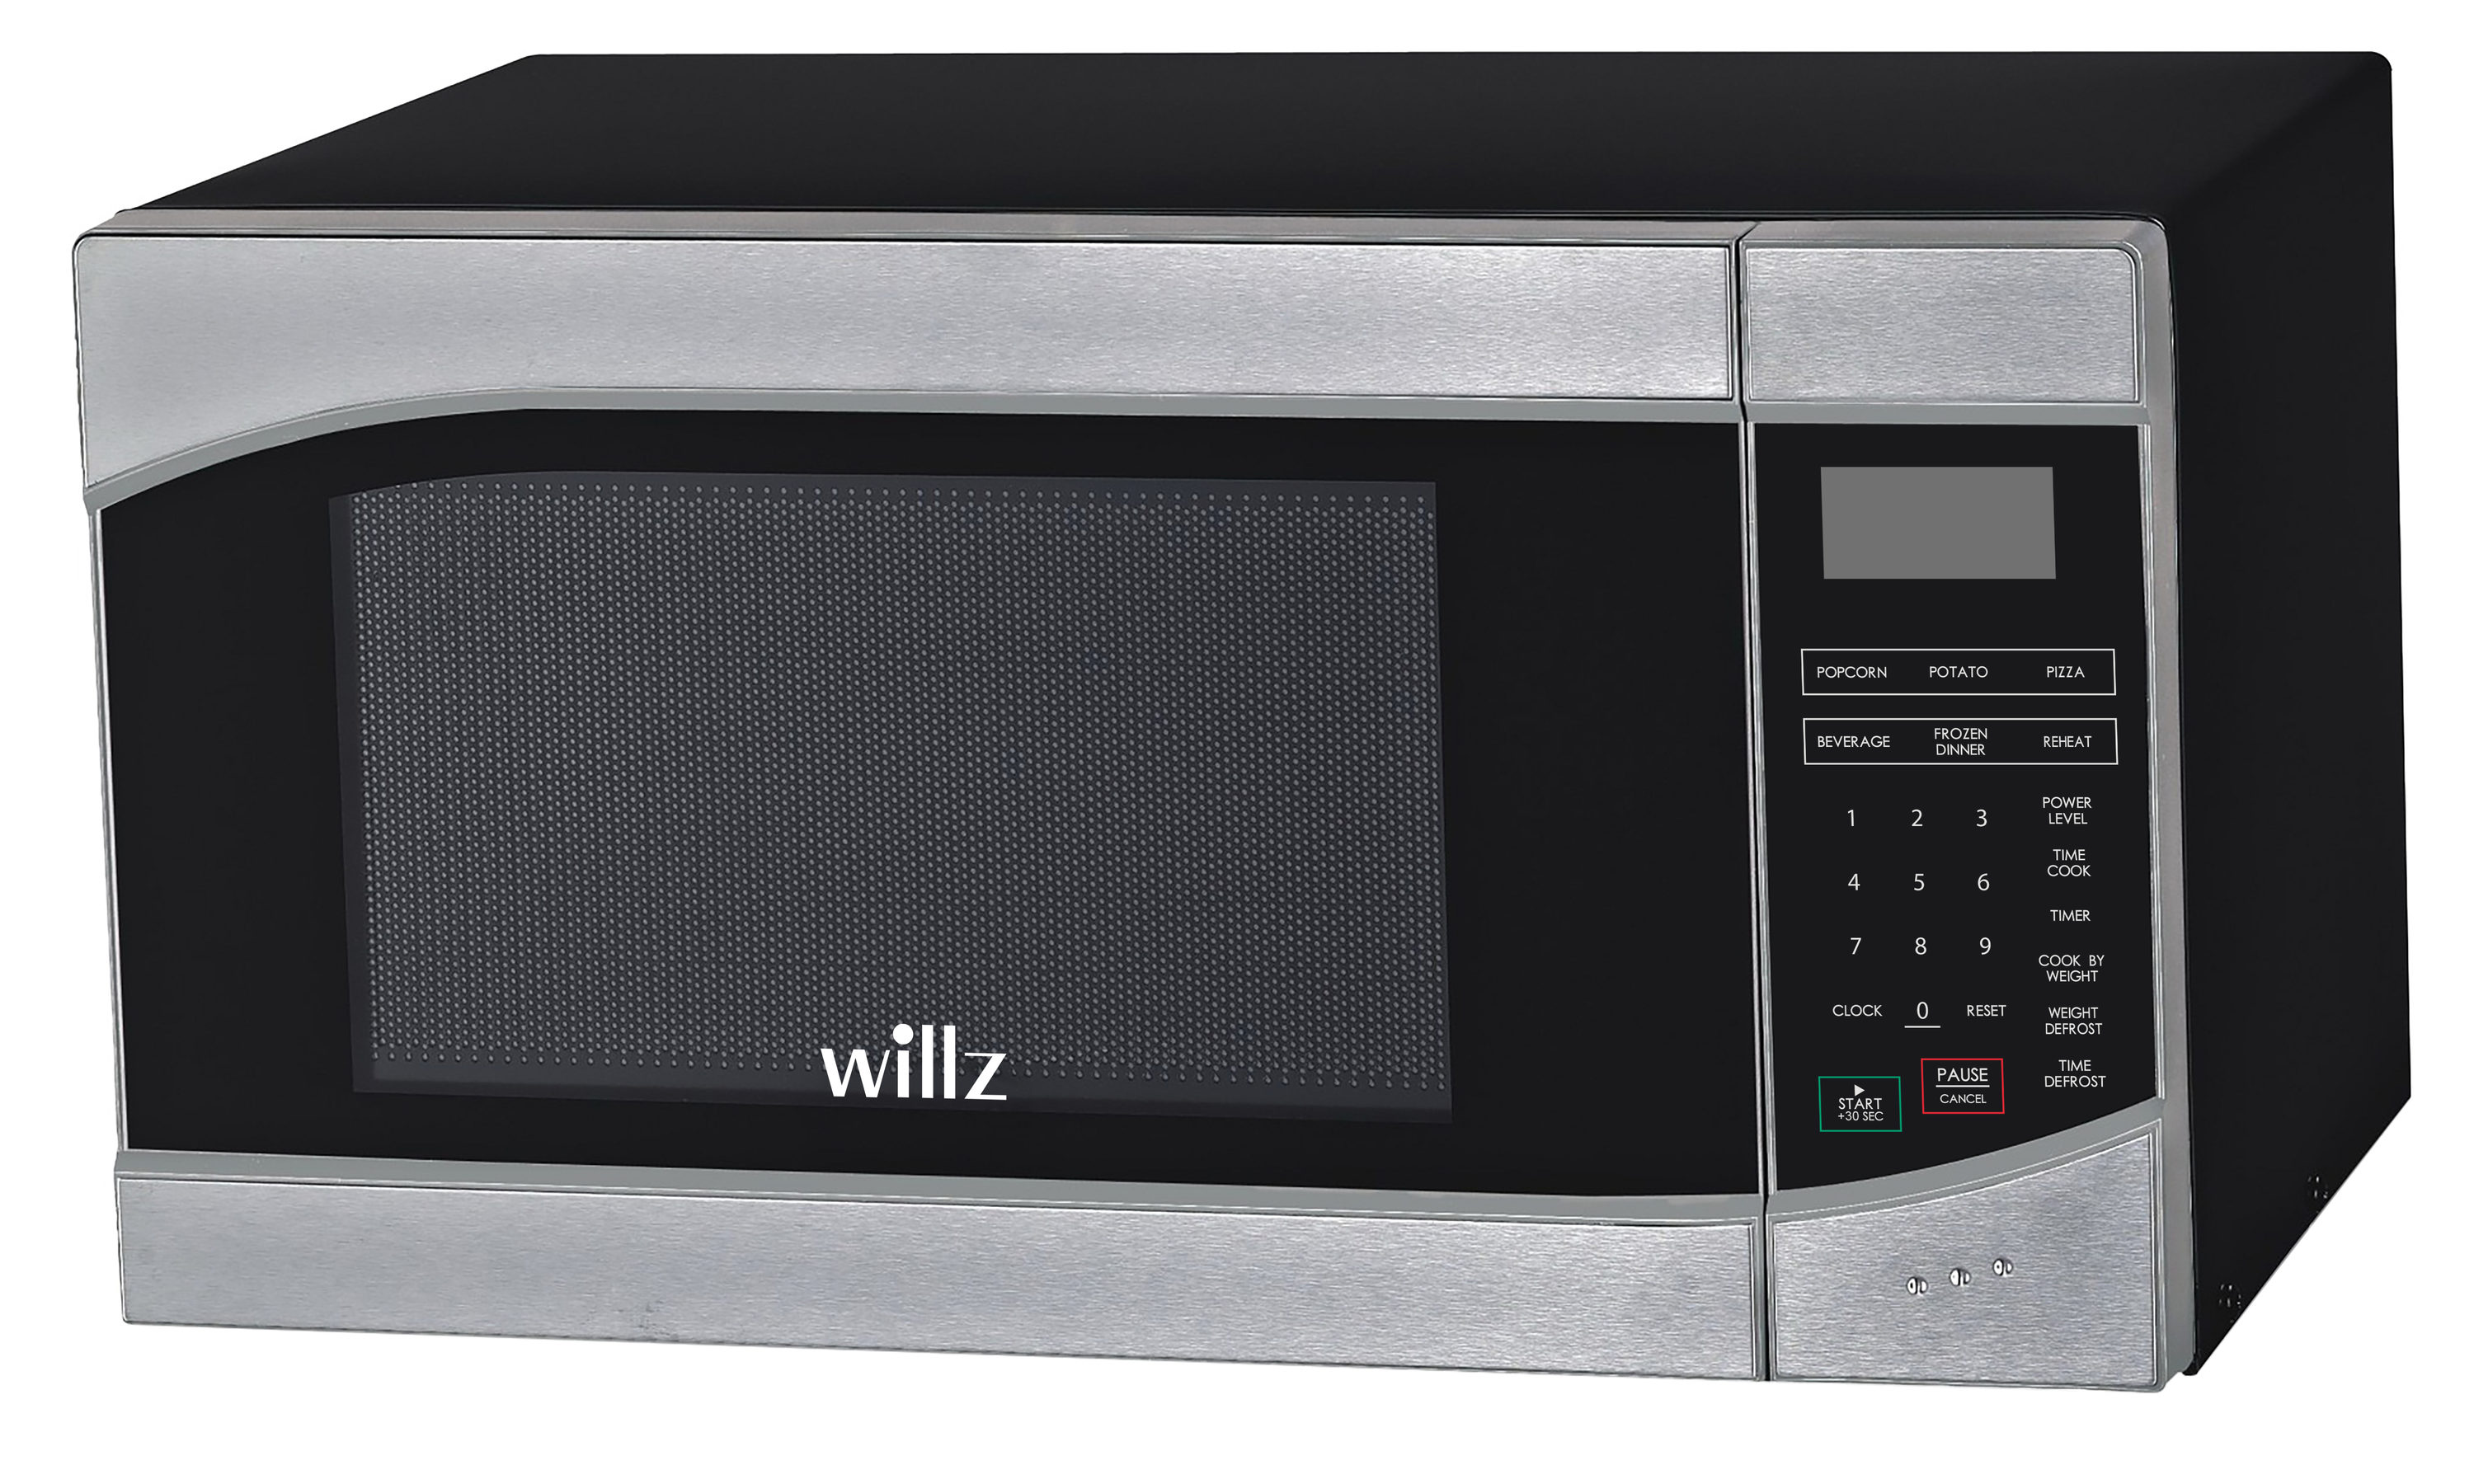 Willz 0.7 Cu. ft. Microwave Oven in Stainless Steel